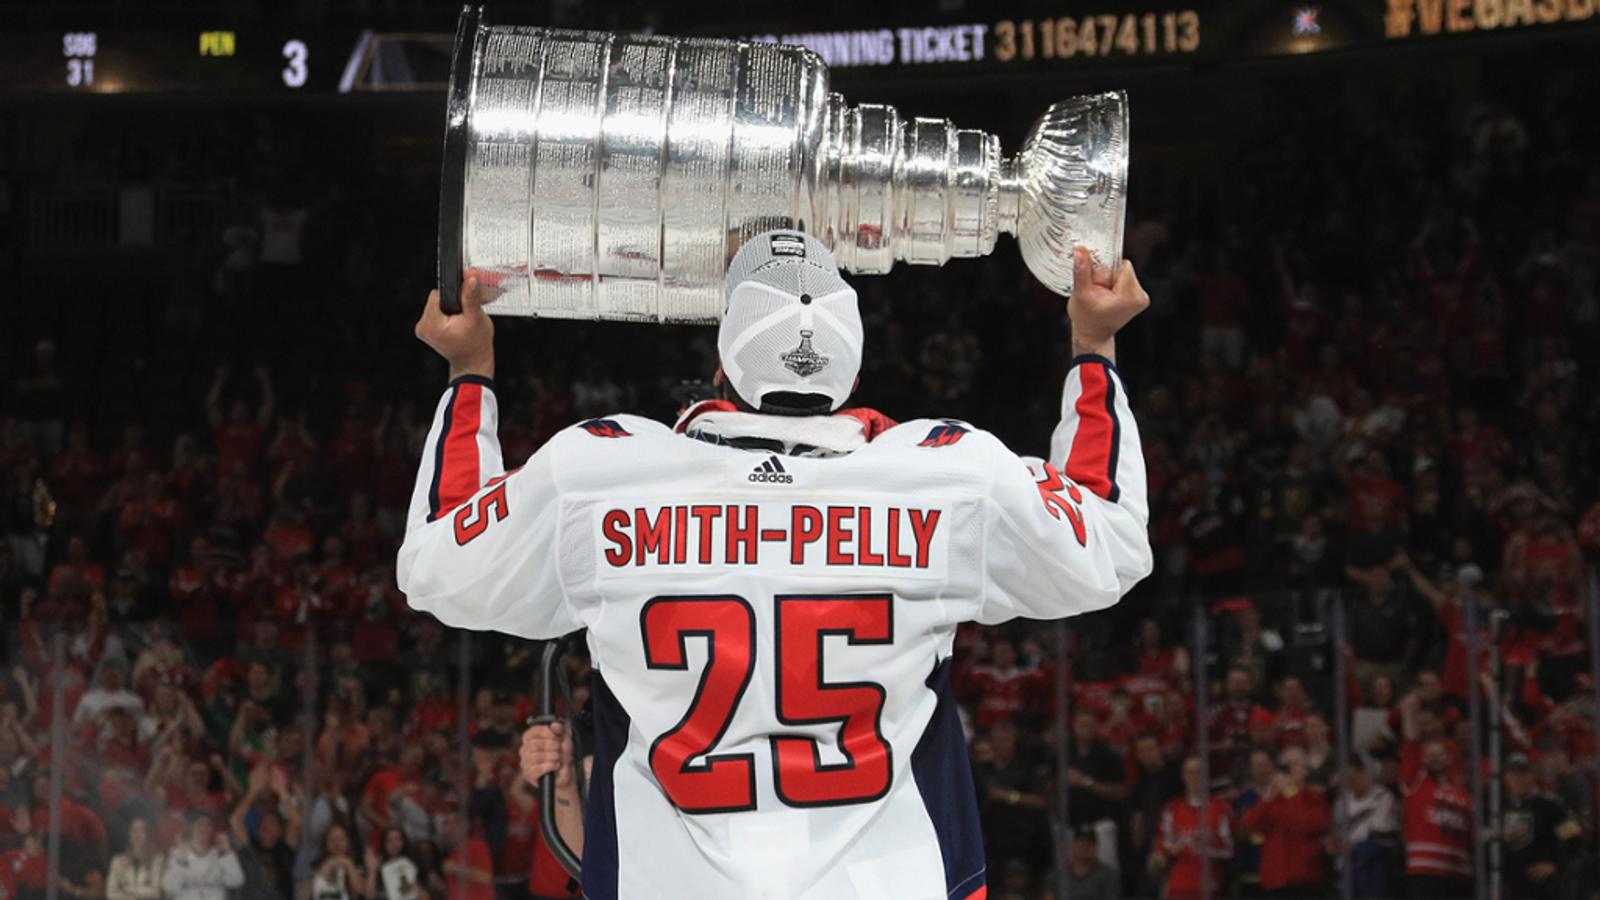 It’s over for Stanley Cup hero Devante Smith-Pelly